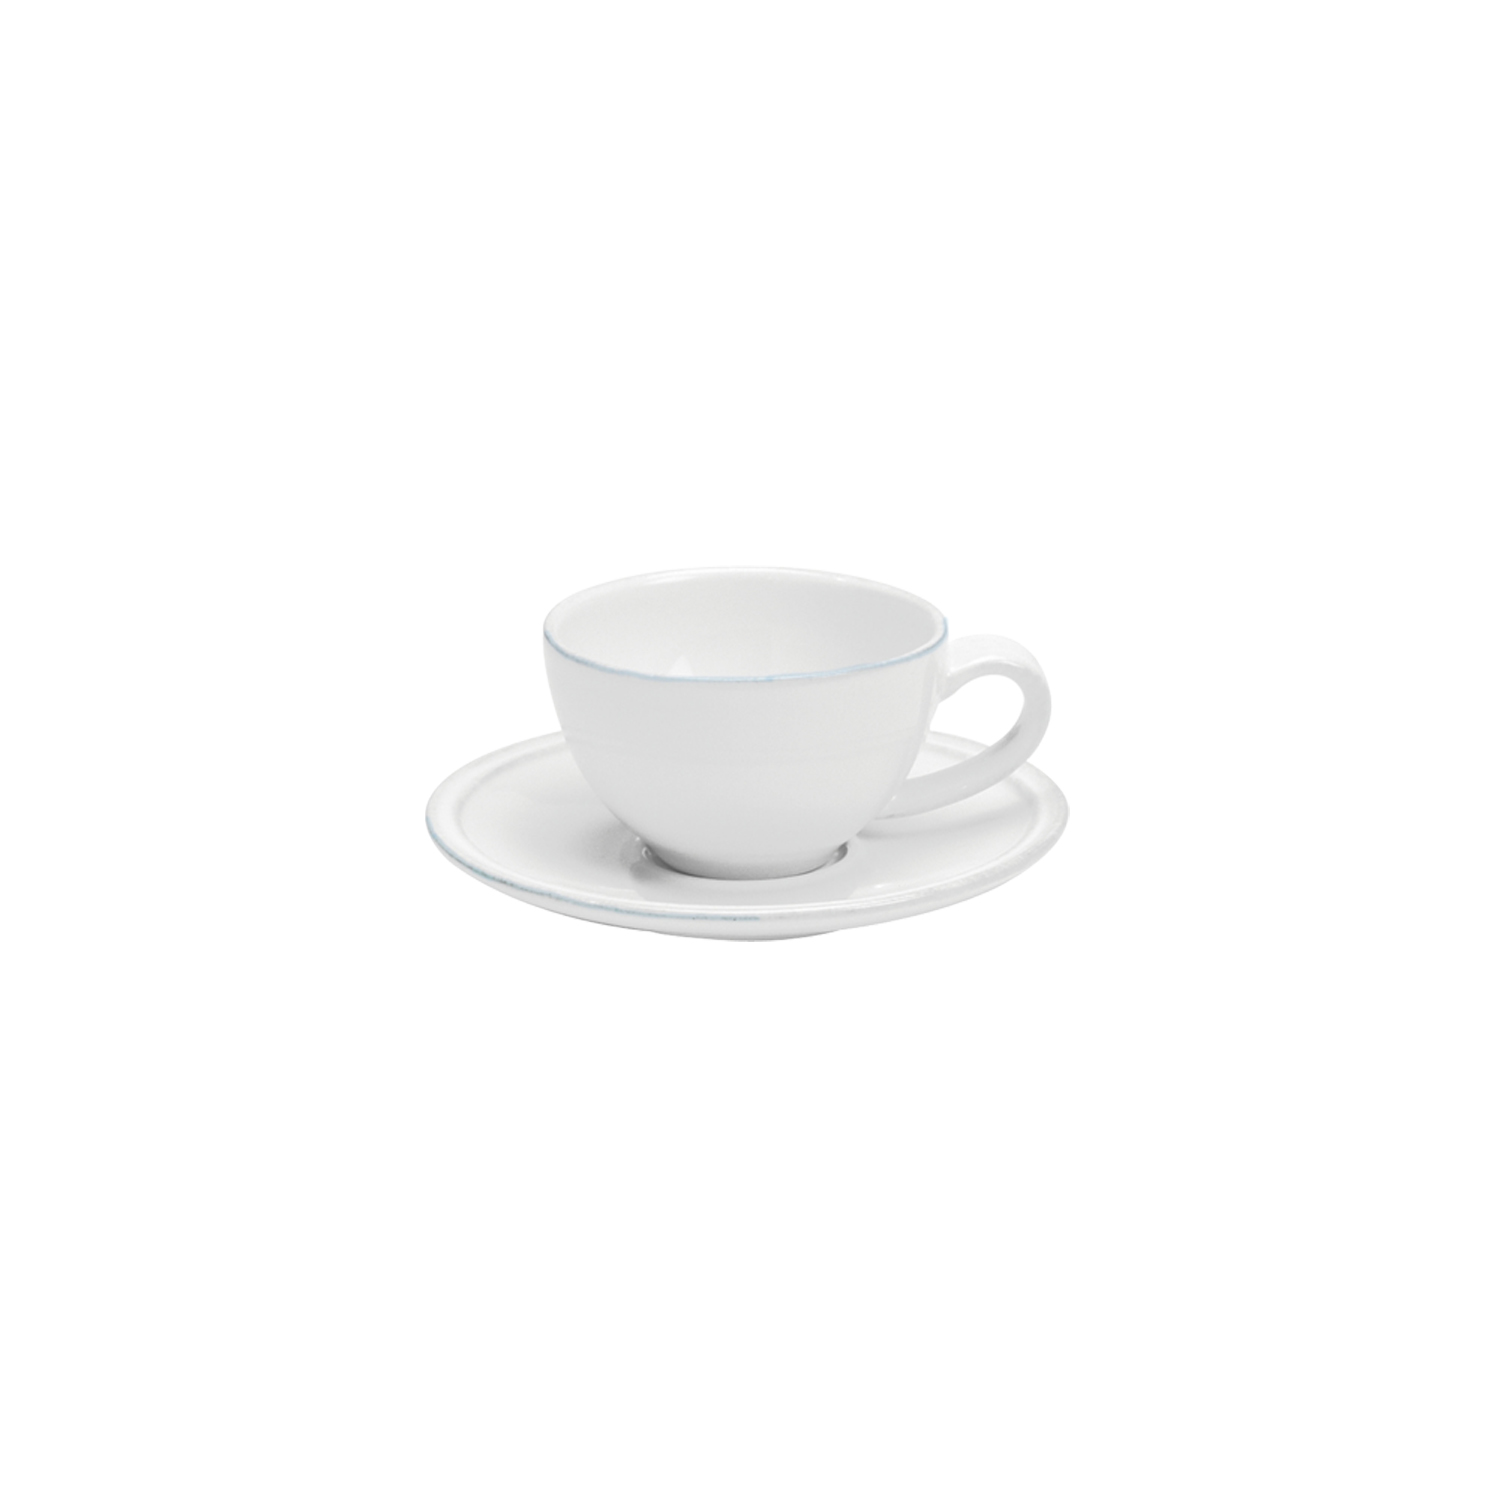 Friso White Coffee Cup & Saucer 0.09l Gift